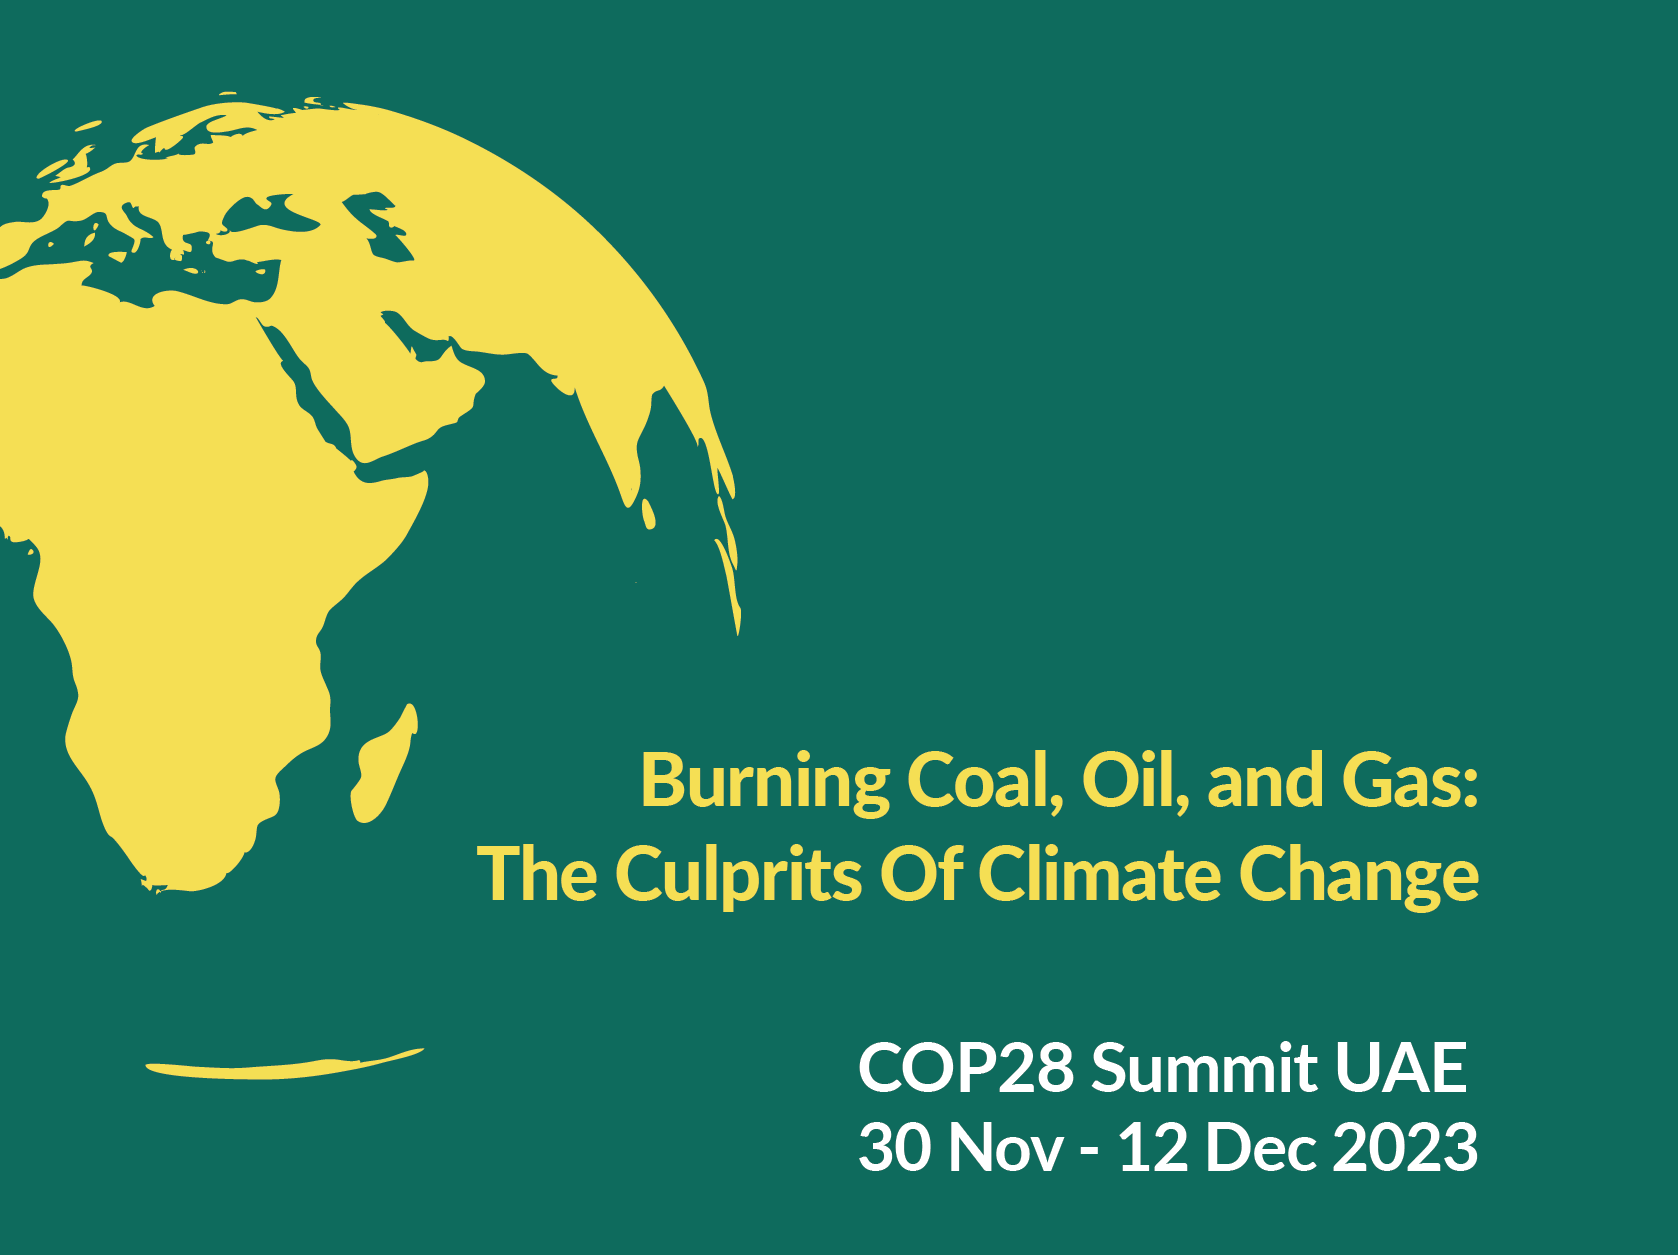 COP28 - Burning coal, oil and gas - the culprits of climate change